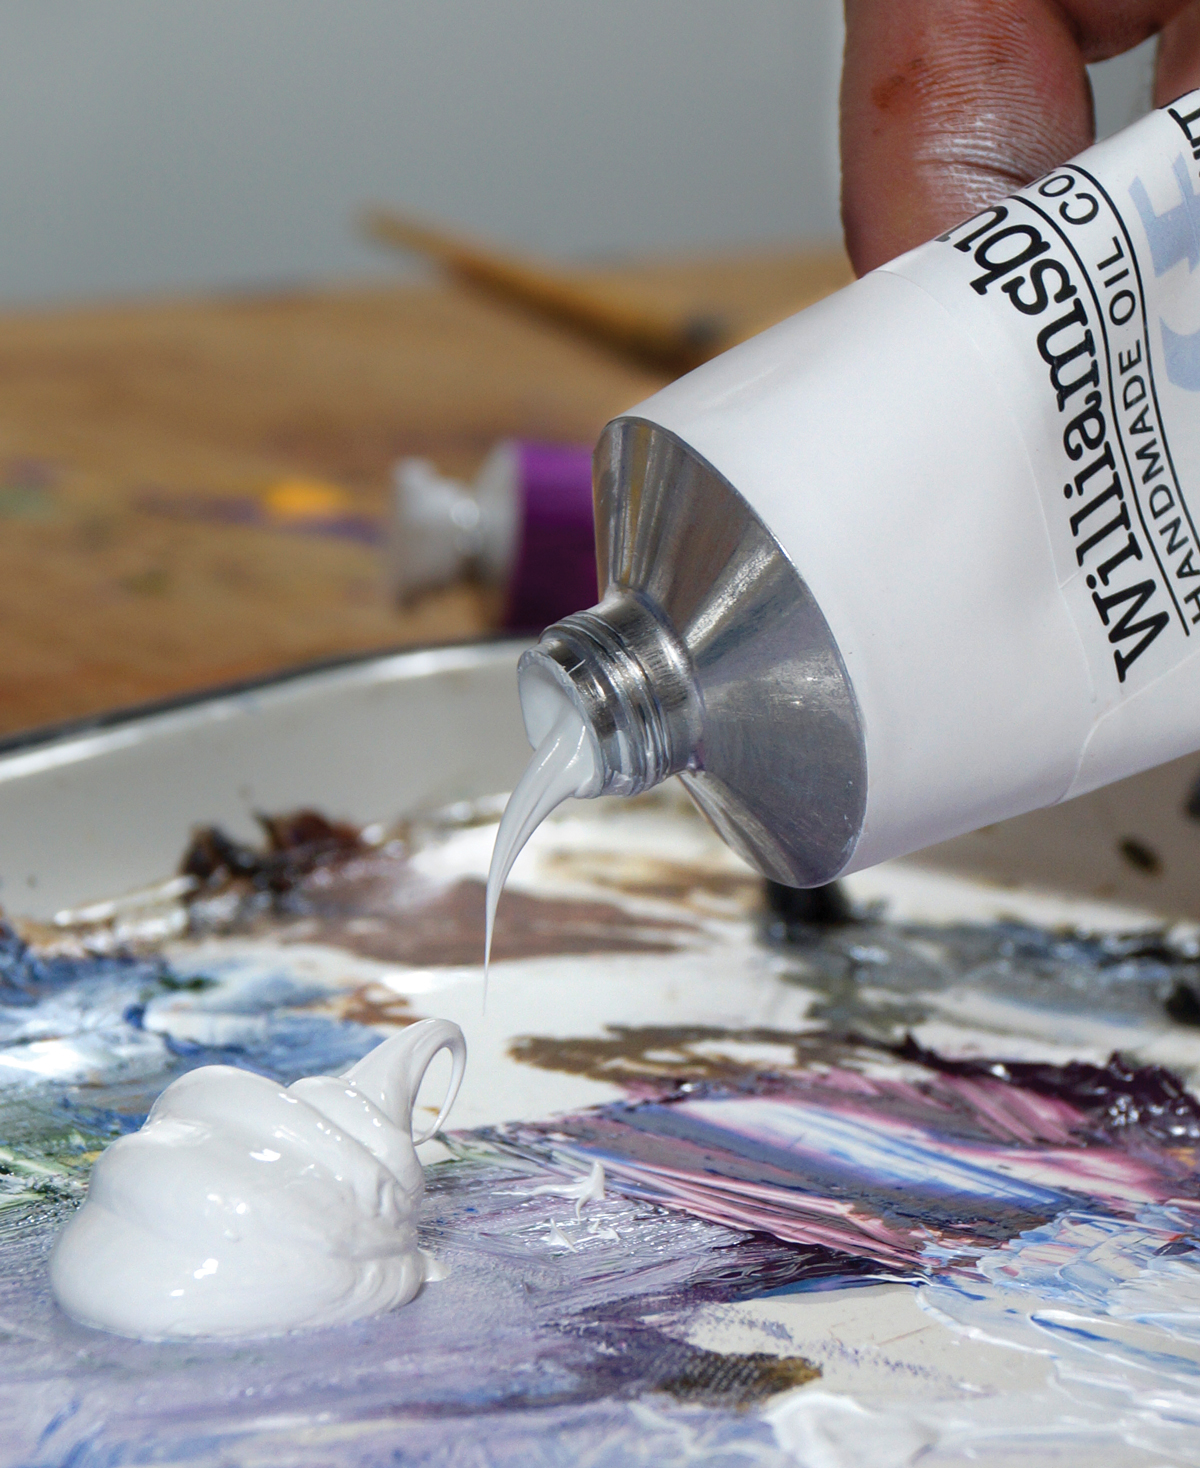 Is There Really a Debate over Issues with Zinc White? - Materials